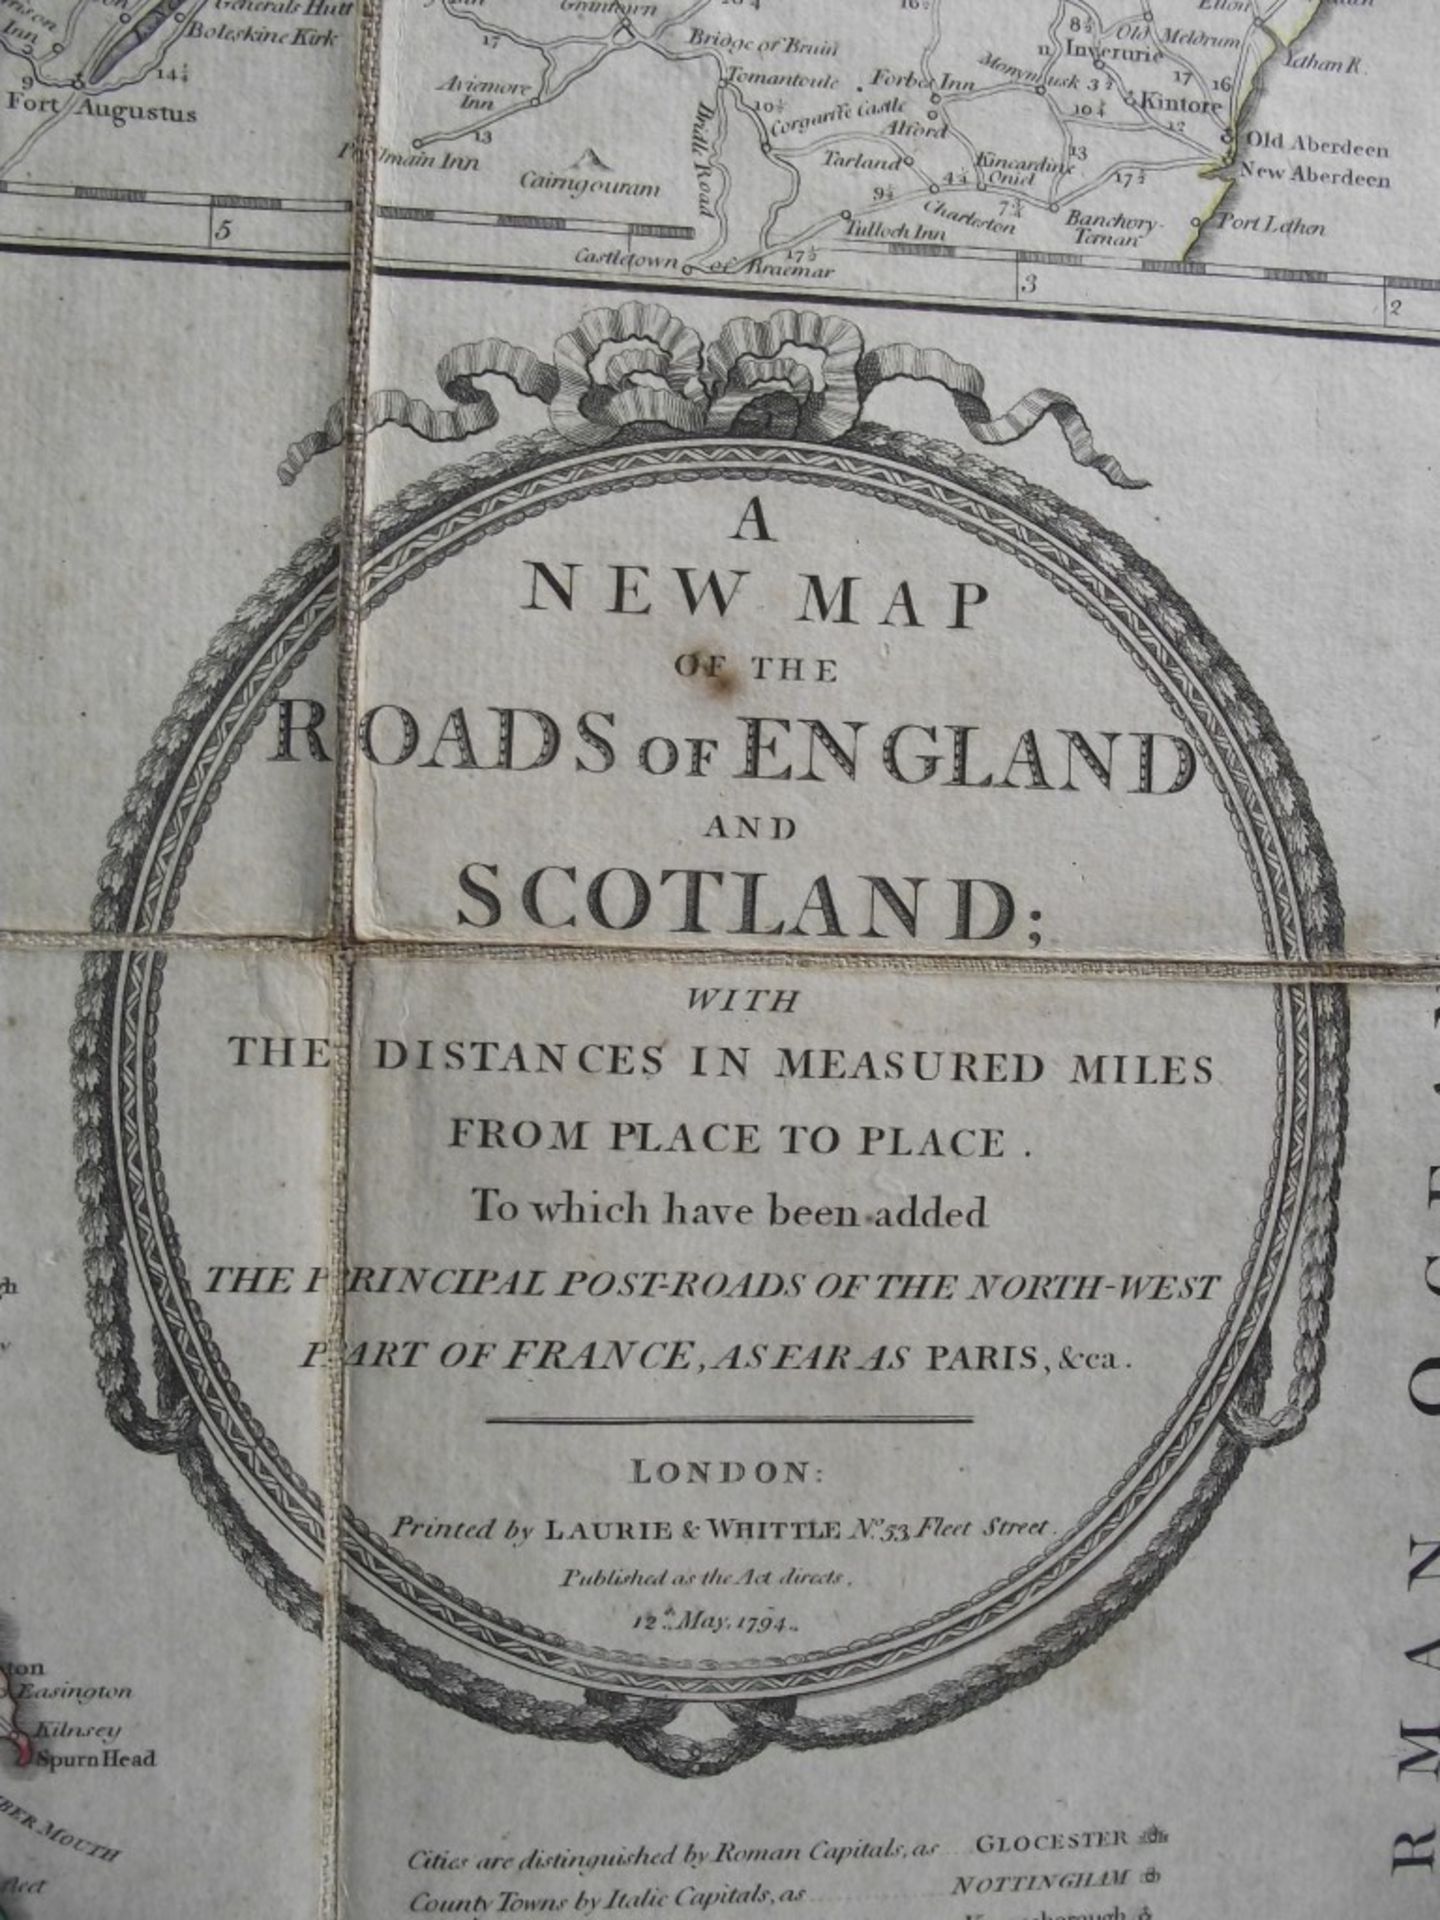 A New Map of the Roads of Ireland and Scotland - by Laurie & Whittle - 12th May 1794 - Original c... - Image 9 of 31